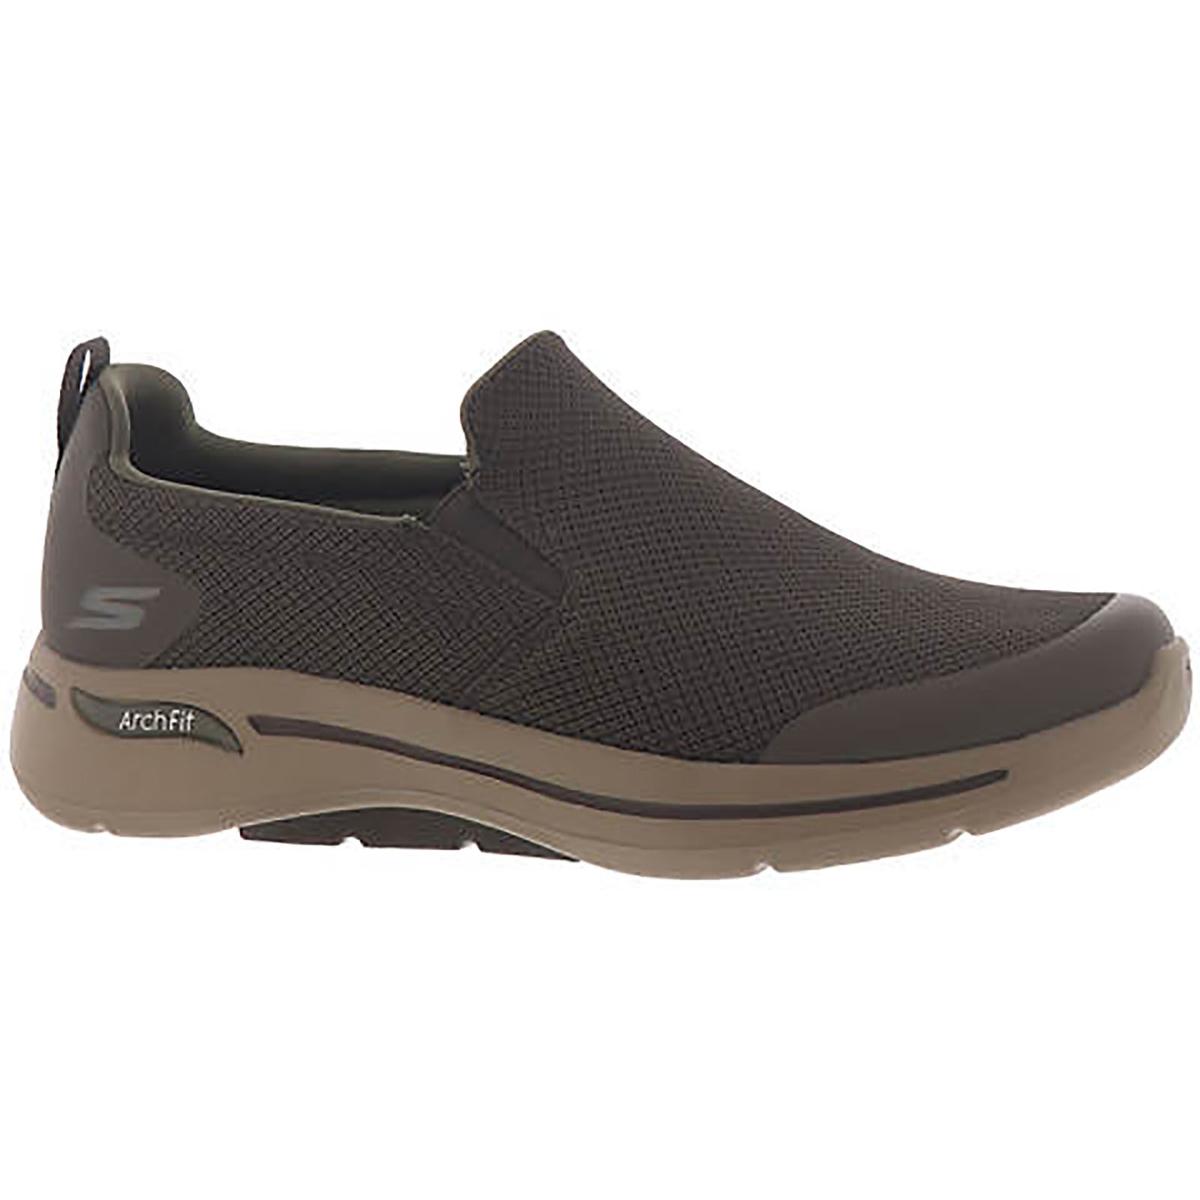 Skechers Go Walk Arch Fit - Togpath Mens Walking Active Athletic and Training Shoes